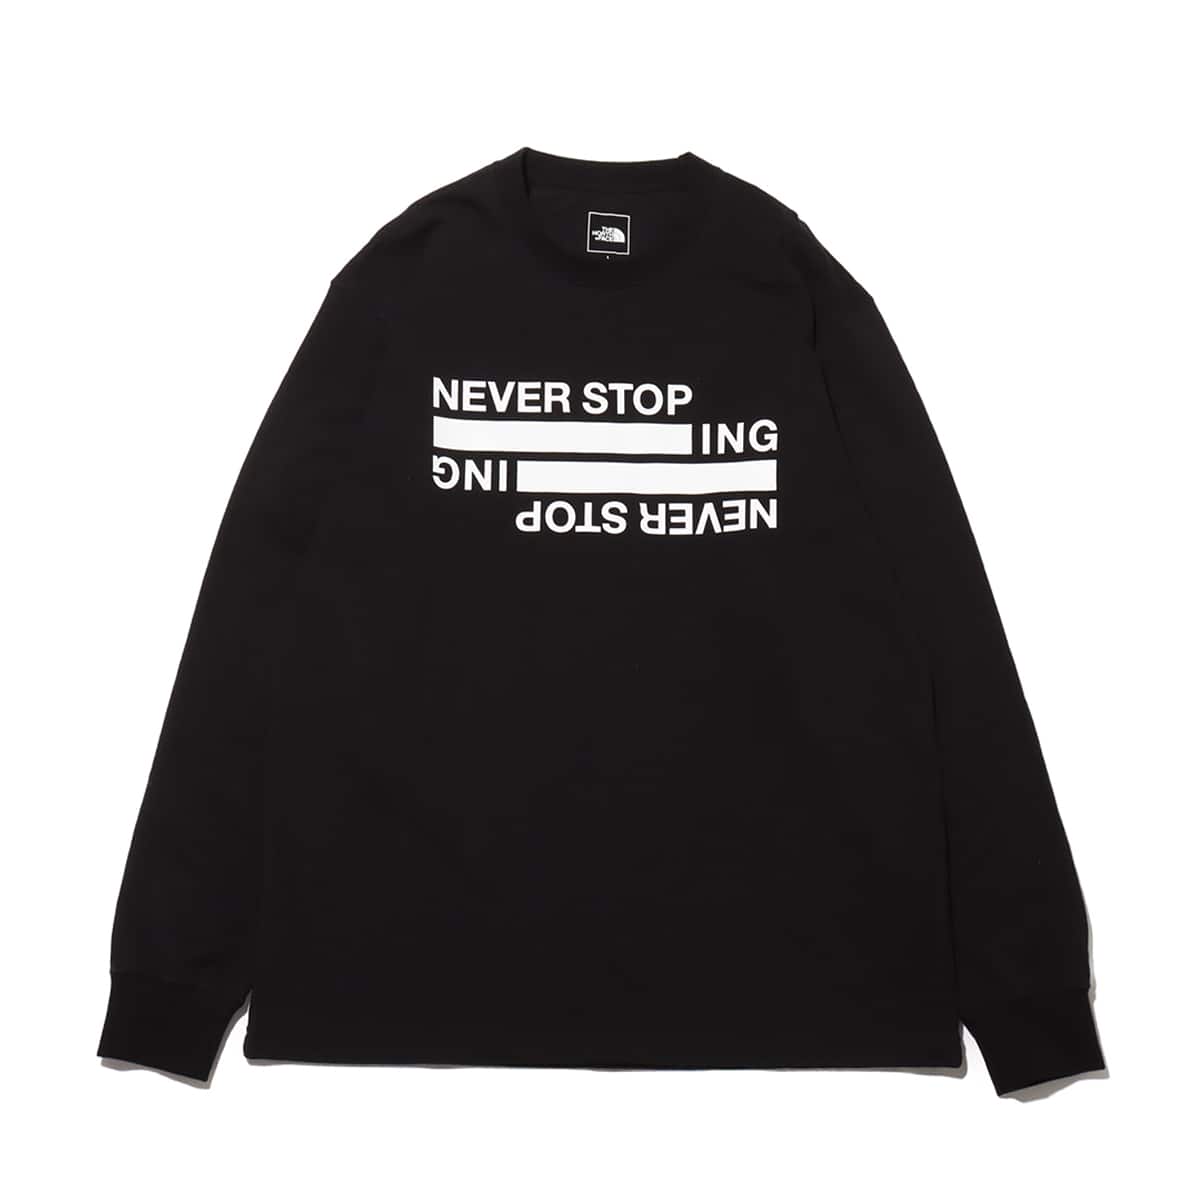 THE NORTH FACE L/S NEVER STOP ING Tee ブラック 24SS-I